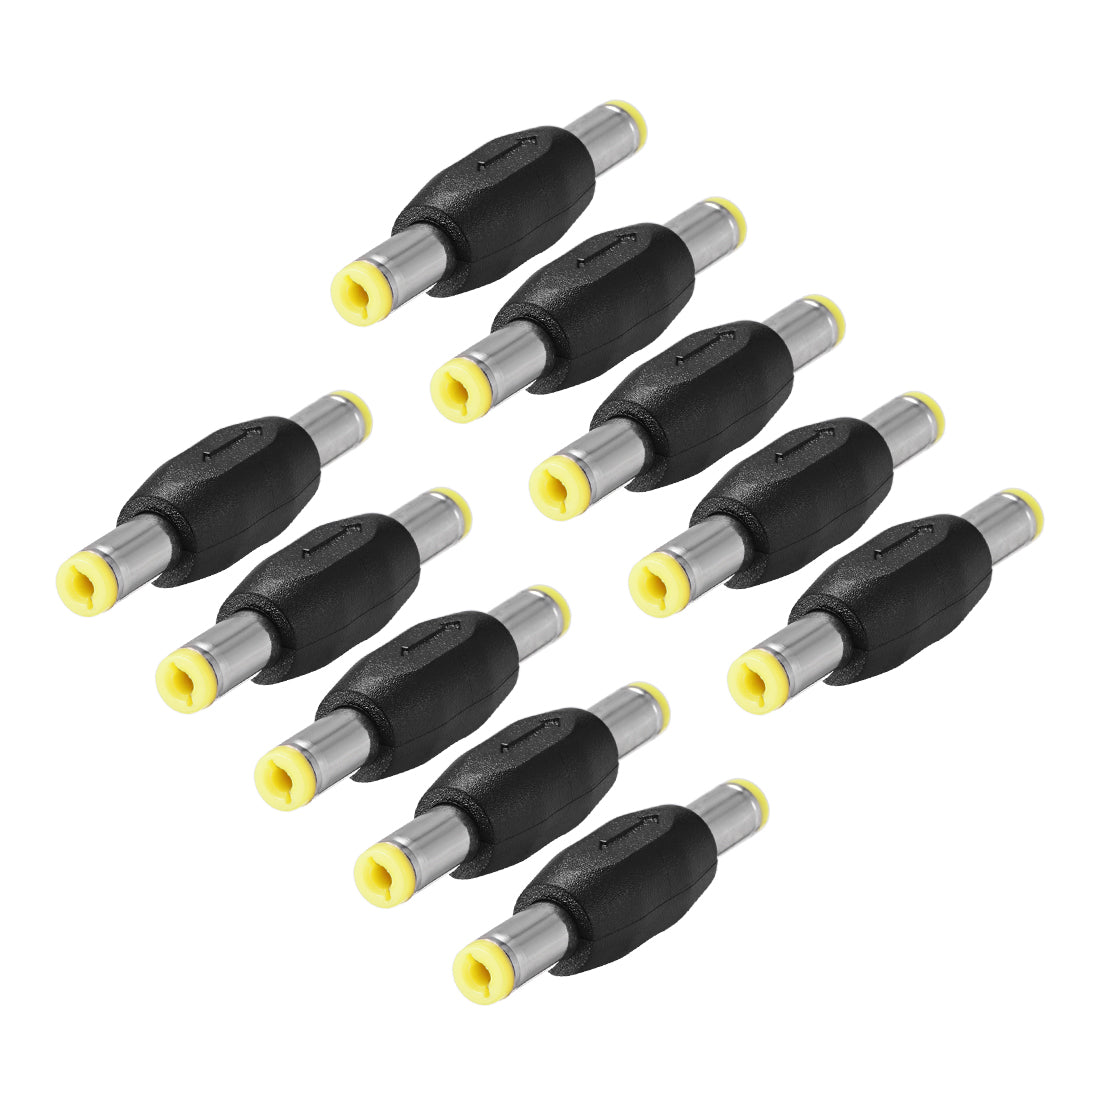 uxcell Uxcell DC Male to Male Coupler Connector 5.5mm x 2.1mm Power Cable Jack Adapter 10Pcs